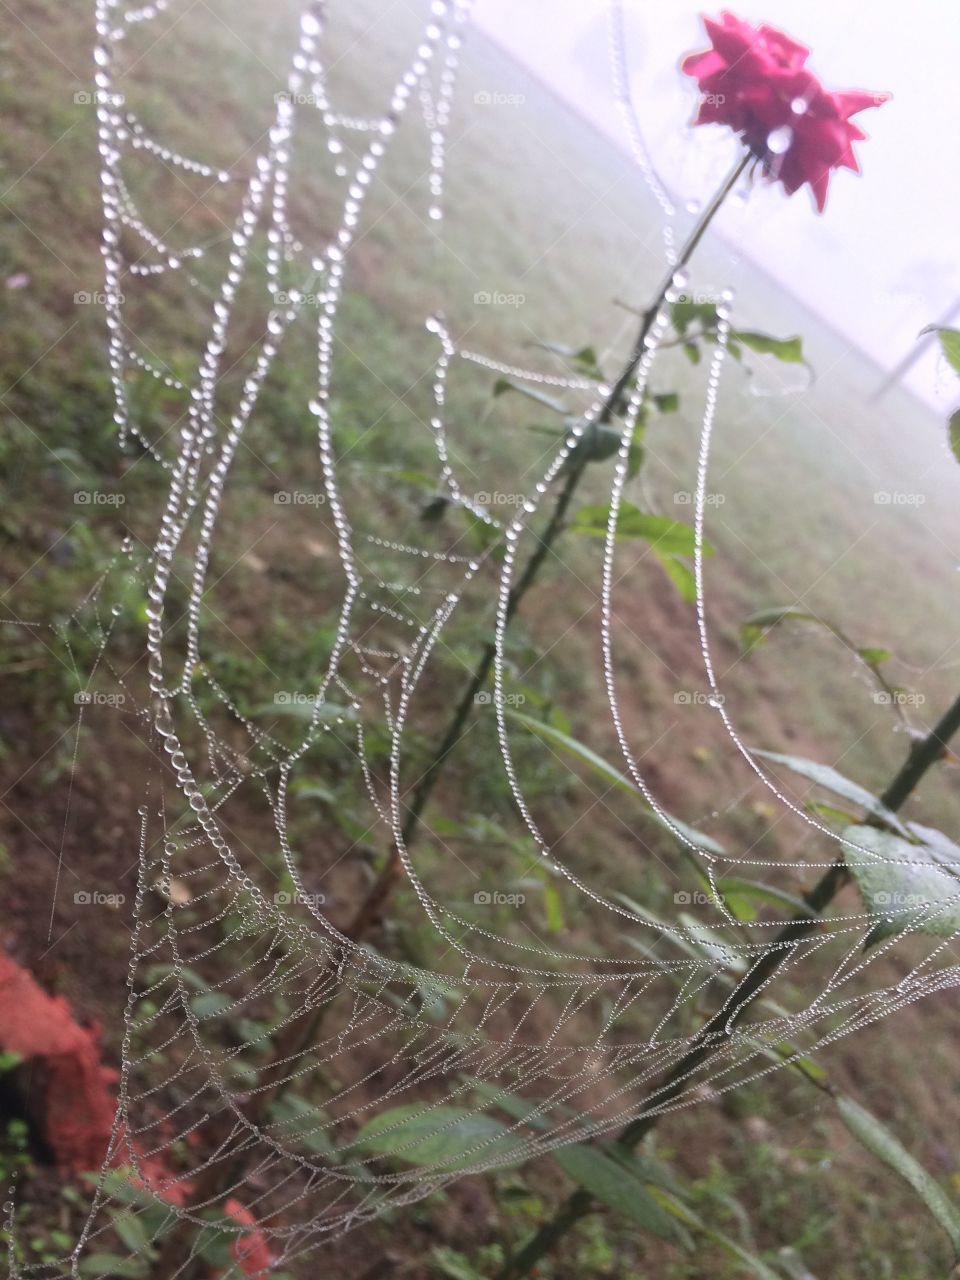 Water droplets on spiderweb